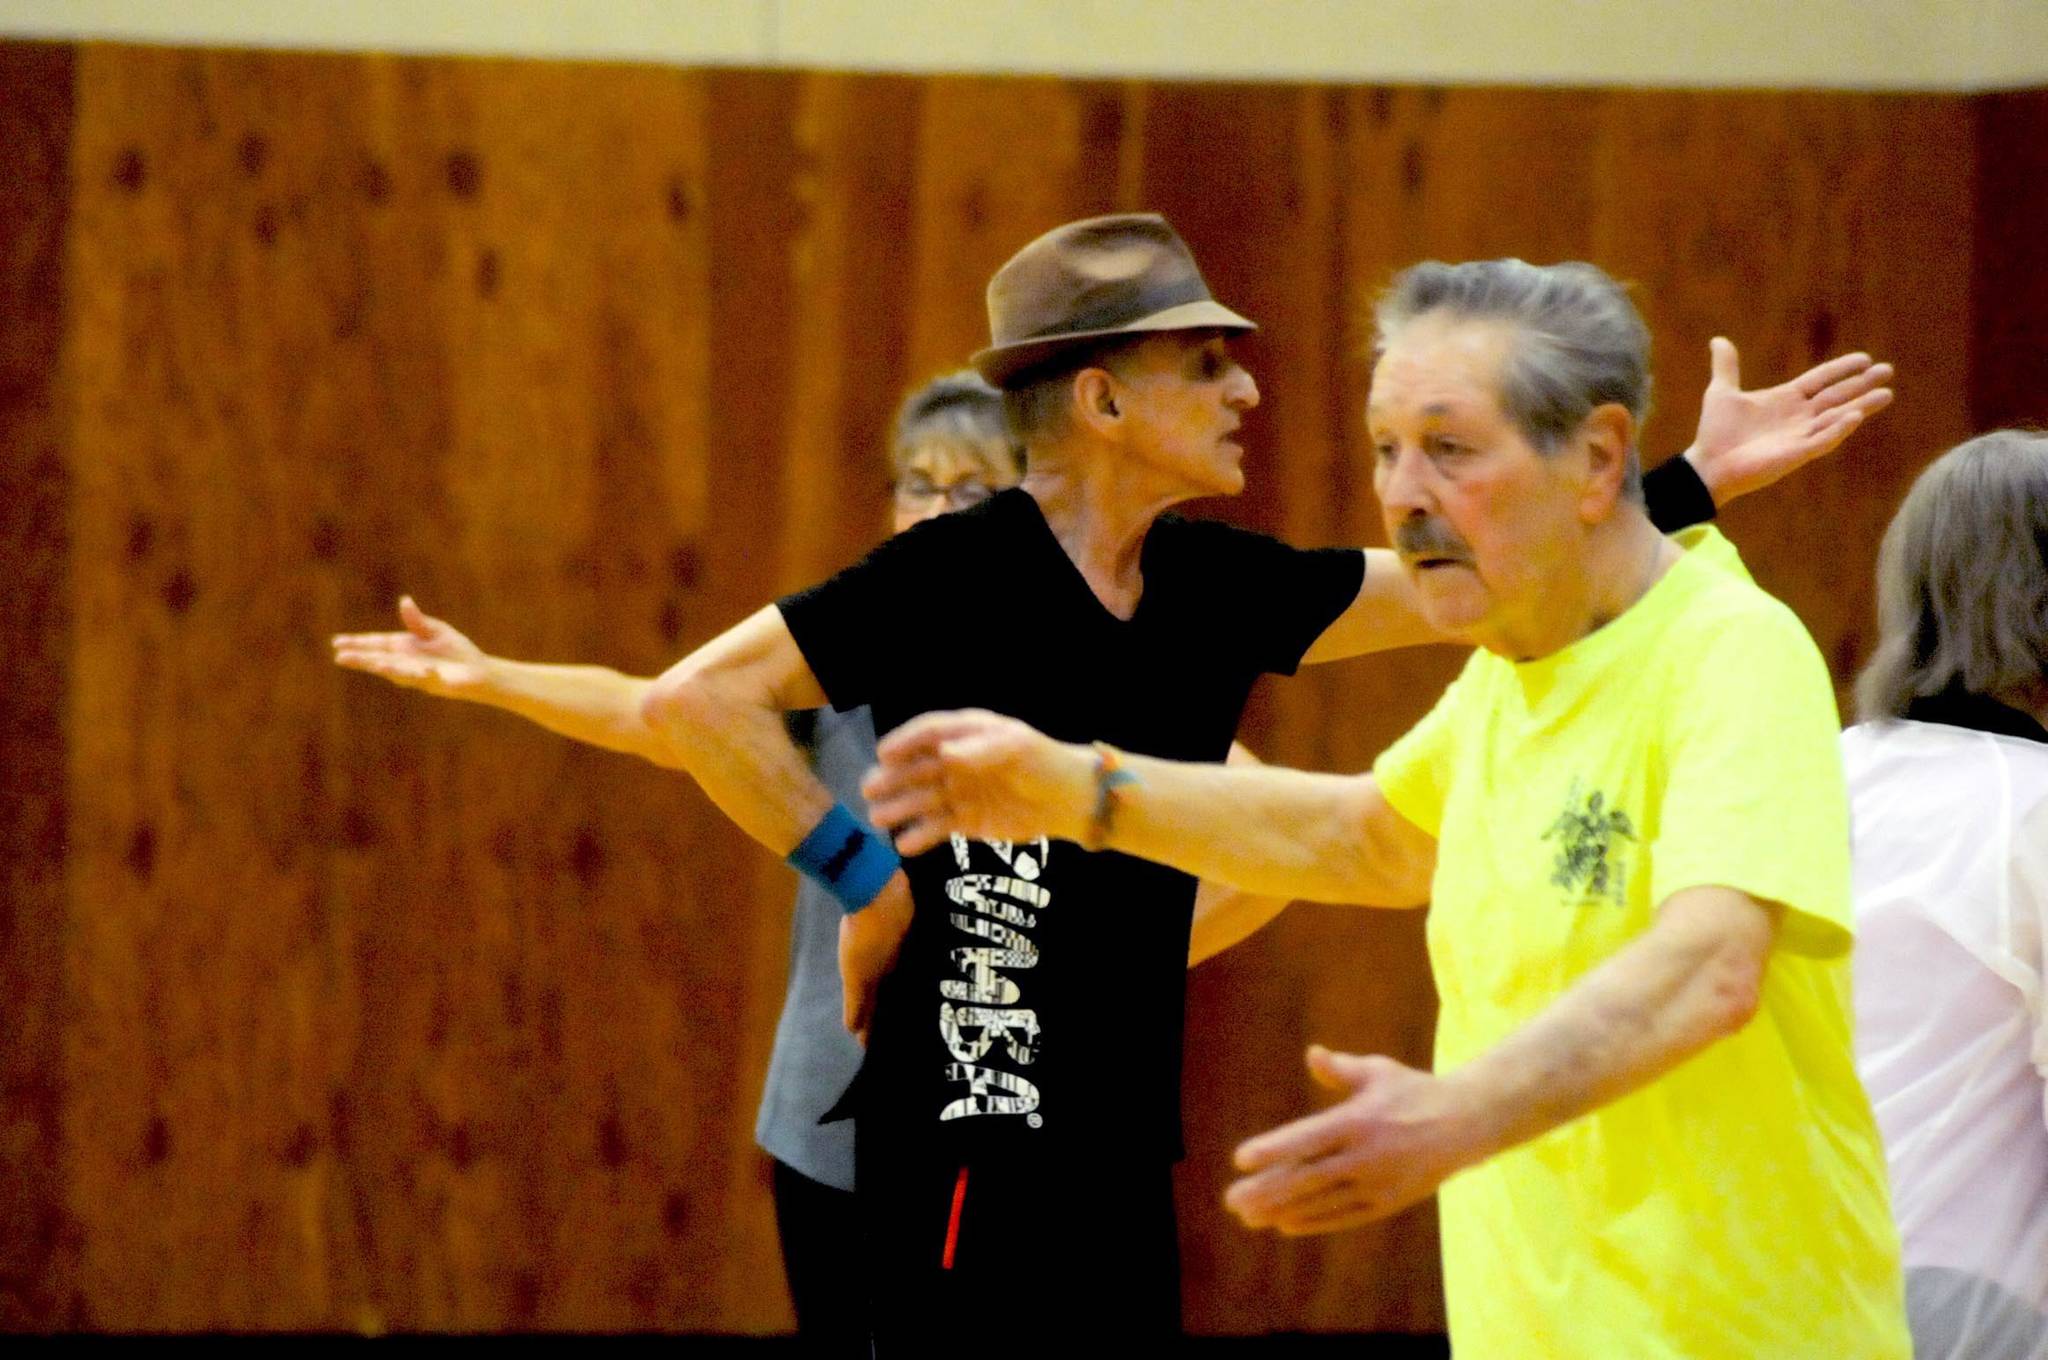 Zumba instructor Truman Krogel (center) leads a class at the Kenai Recreation Center on Thursday, March 15, 2018 in Kenai, Alaska. Krogel, 74, said he first tried Zumba himself four years ago, loved it and began teaching classes of his own in January 2017. (Photo by Elizabeth Earl/Peninsula Clarion)